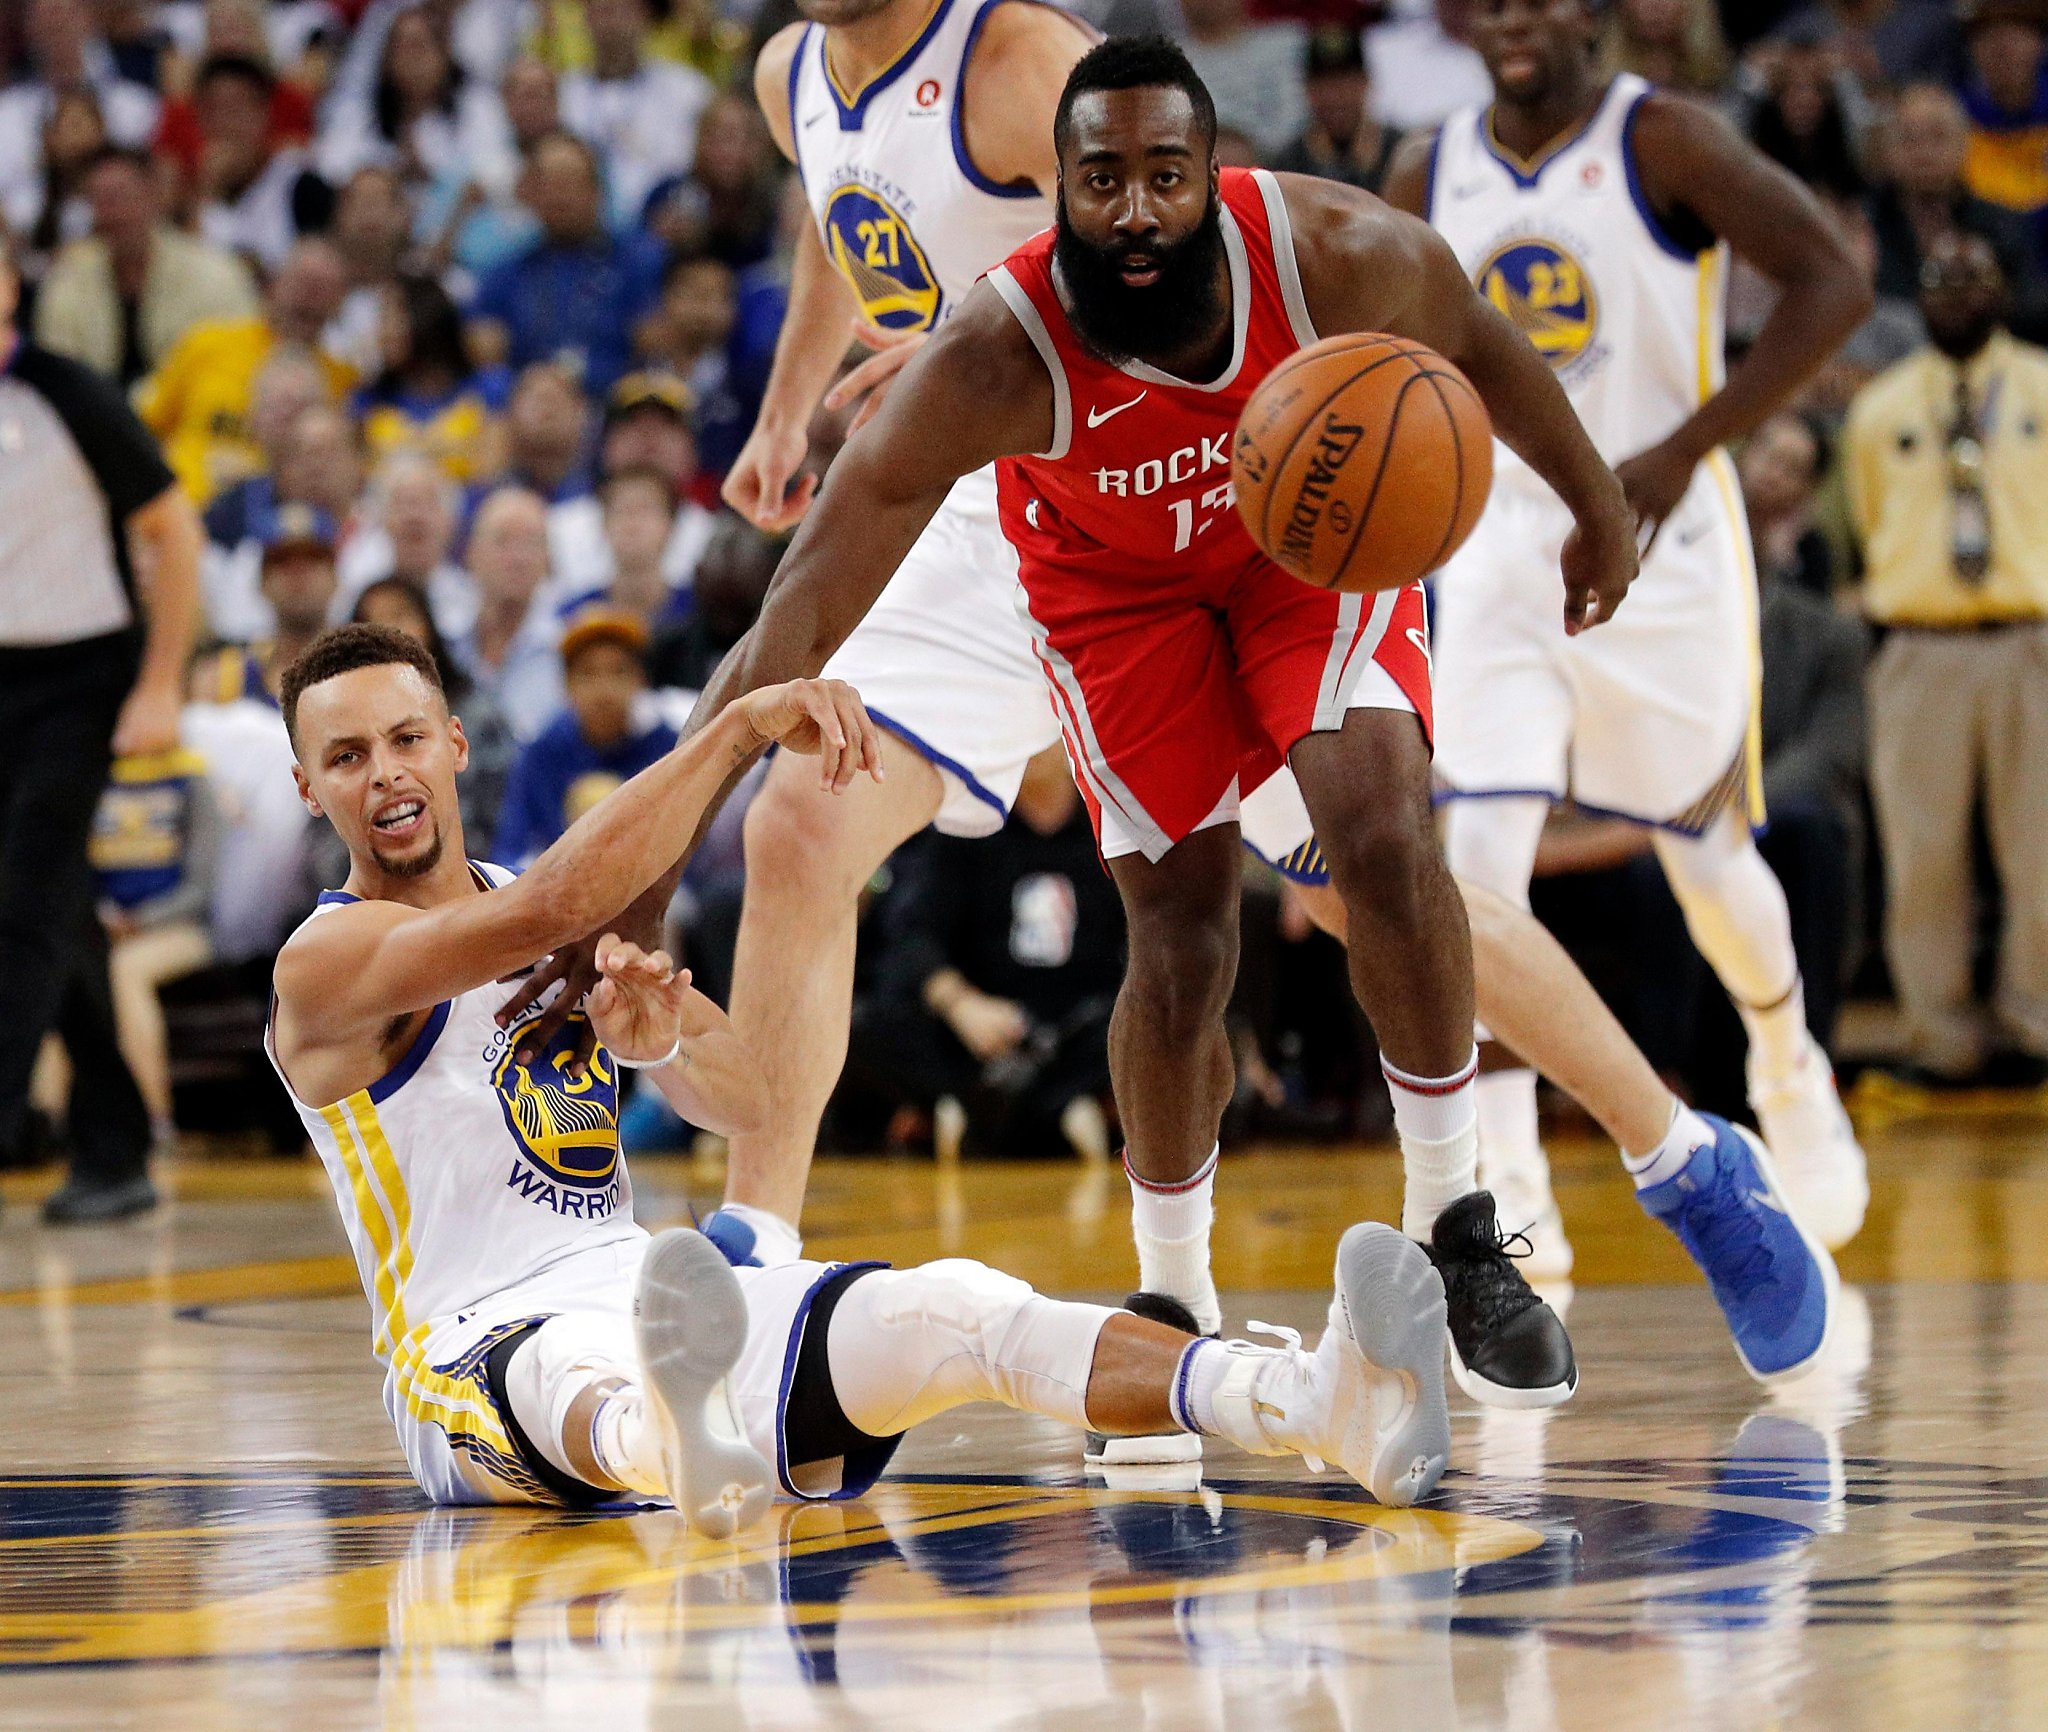 Warriors vs. Rockets is the matchup we’ve waited for - SFChronicle.com2048 x 1732